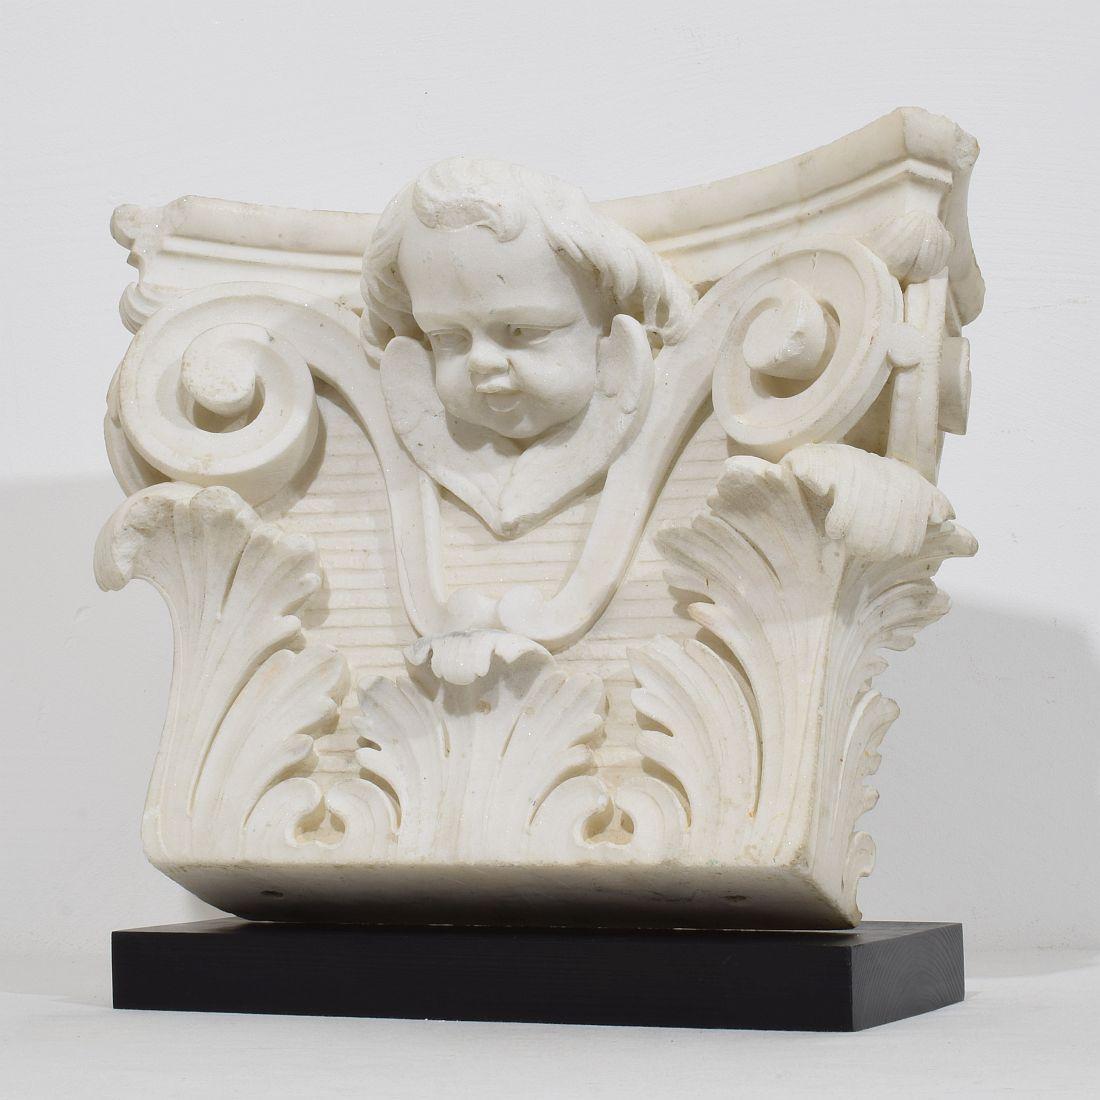 Spectacular hand-carved white marble capital with angel head. 
Beautiful weathered white marble .
France circa 1750
Weathered
Measurements include the wooden pedestal